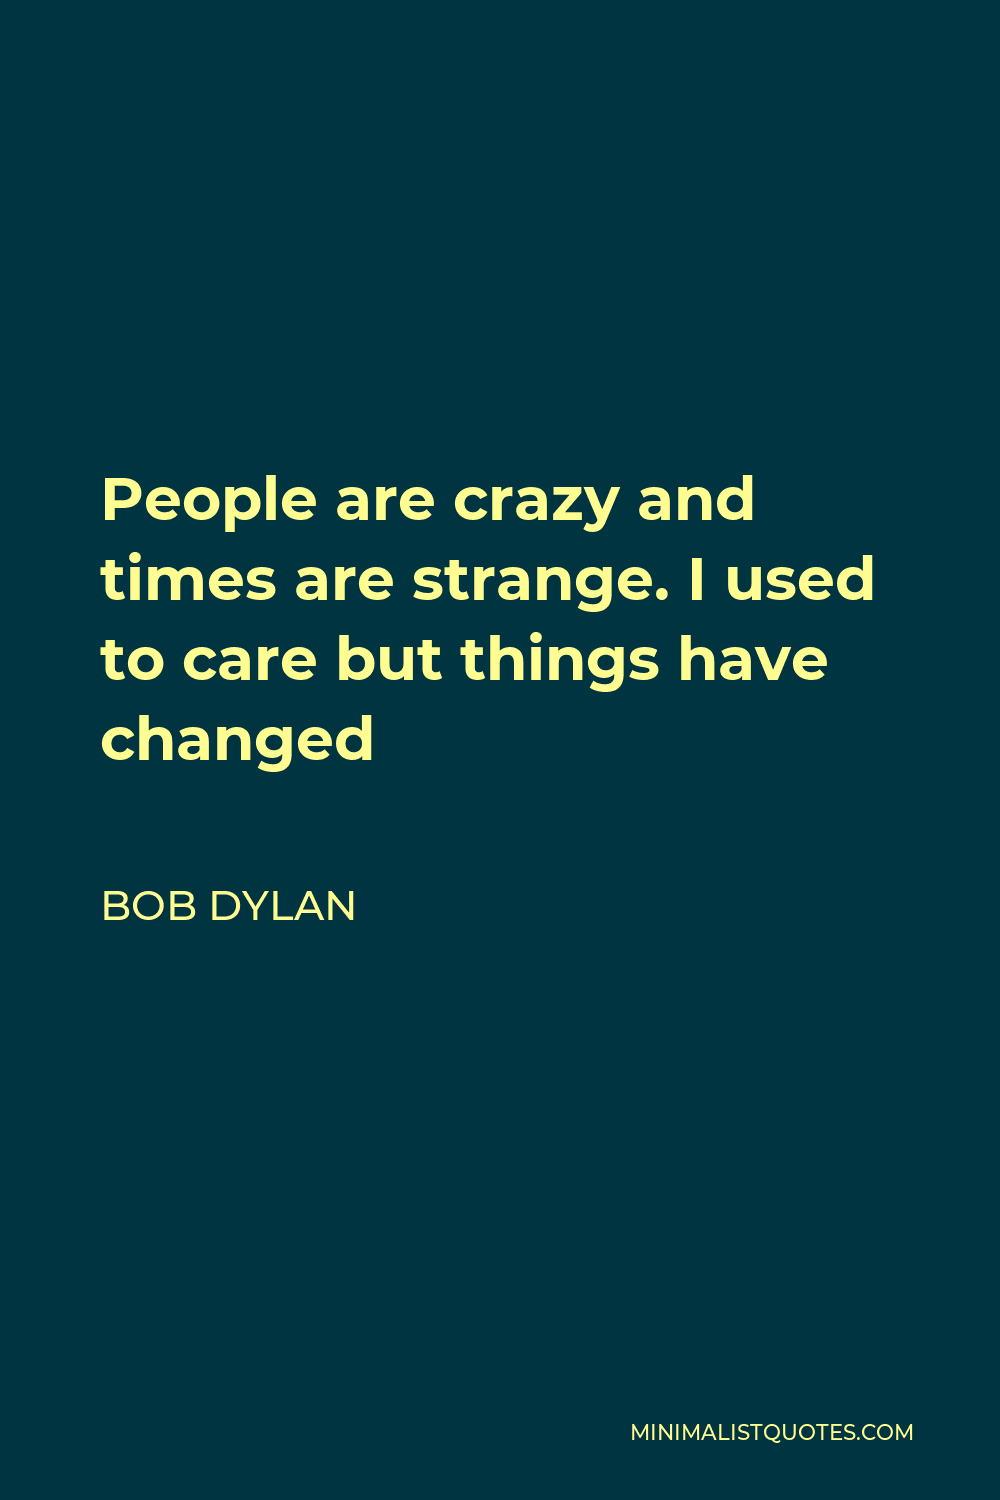 Bob Dylan Quote - People are crazy and times are strange. I used to care but things have changed